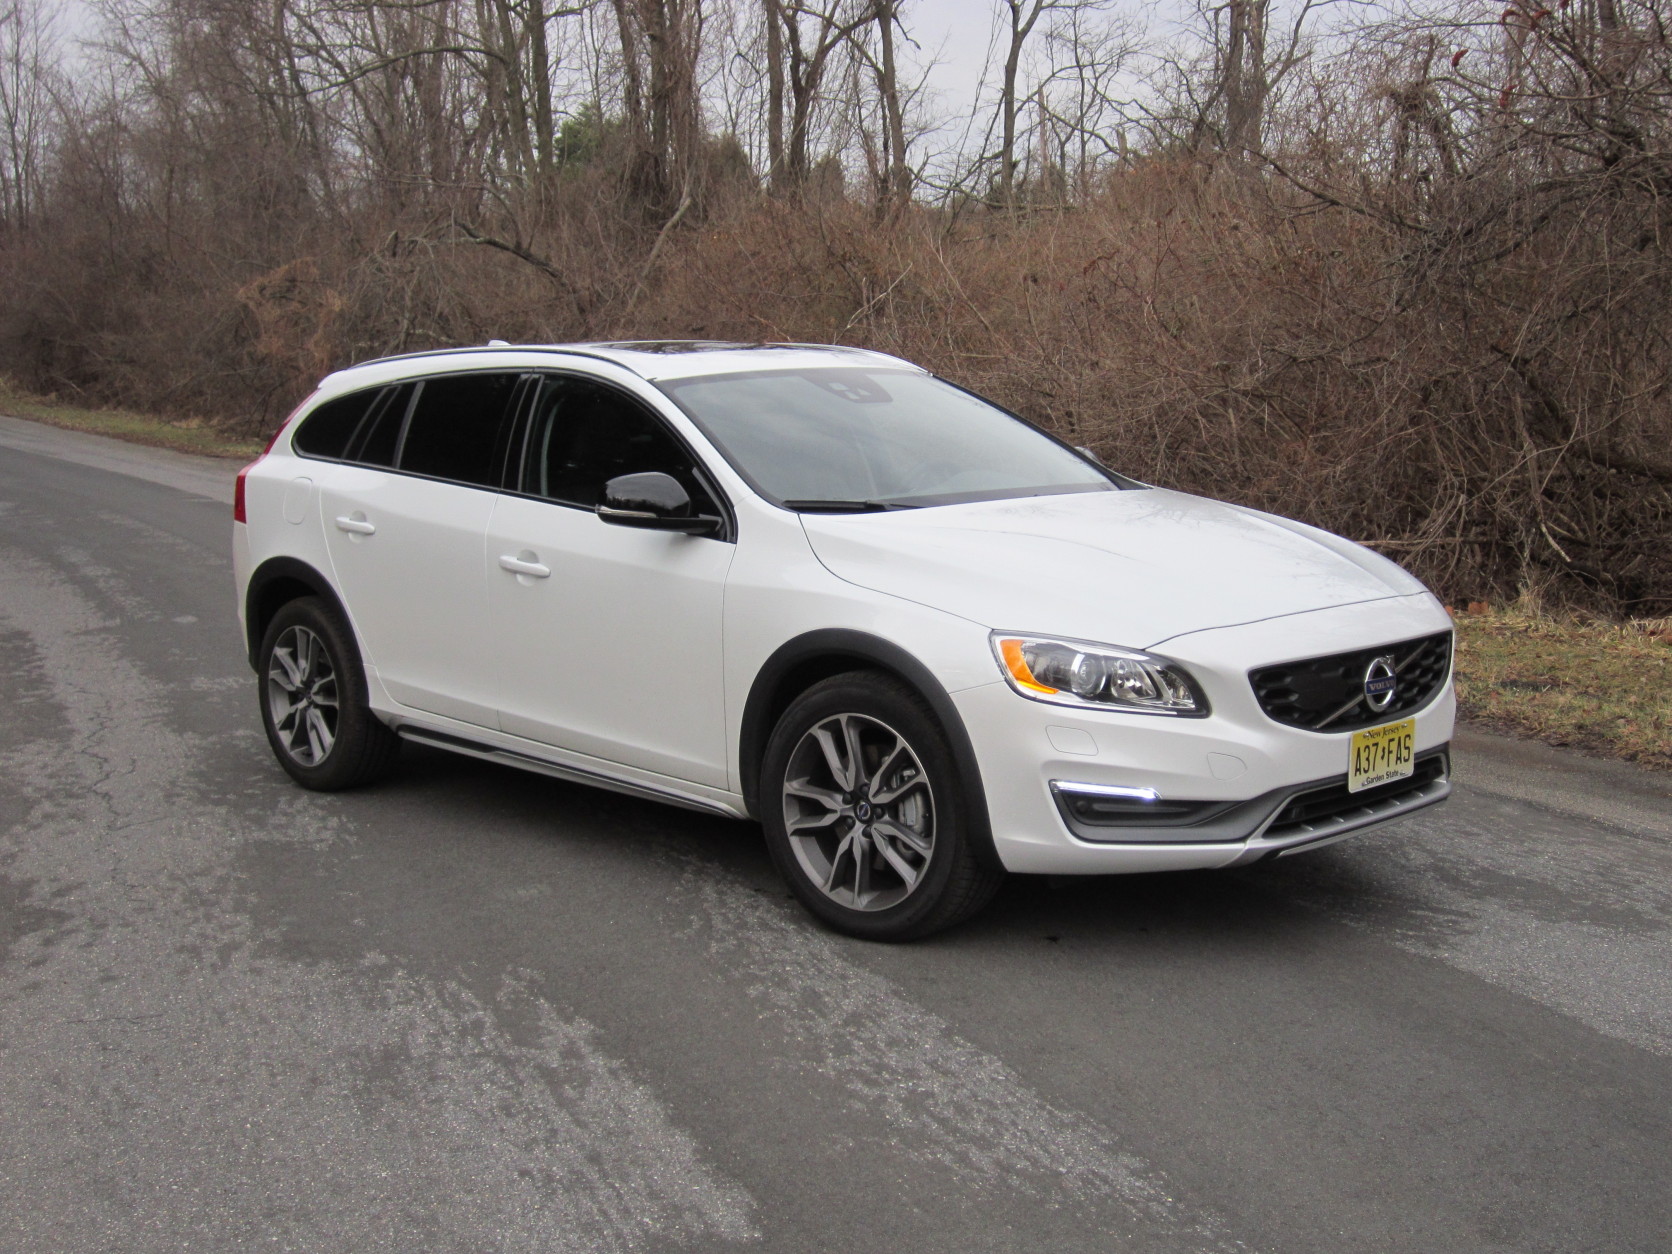 The V60 Cross Country sits higher than the regular V60 wagon and has a more rugged look.  (WTOP/Mike Parris)